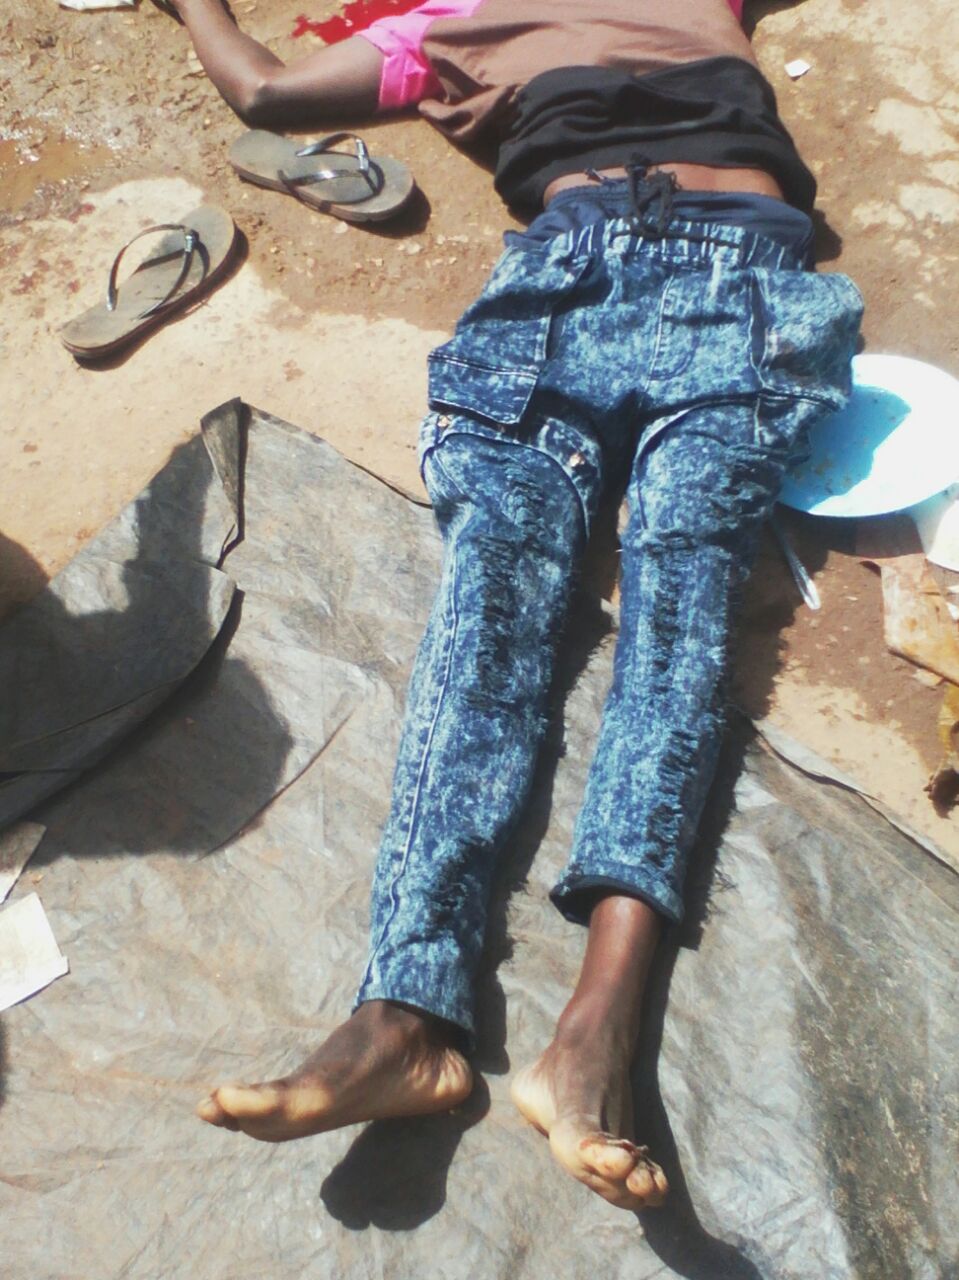 The dead man reportedly fell off Nana Centre in downtown Kampala